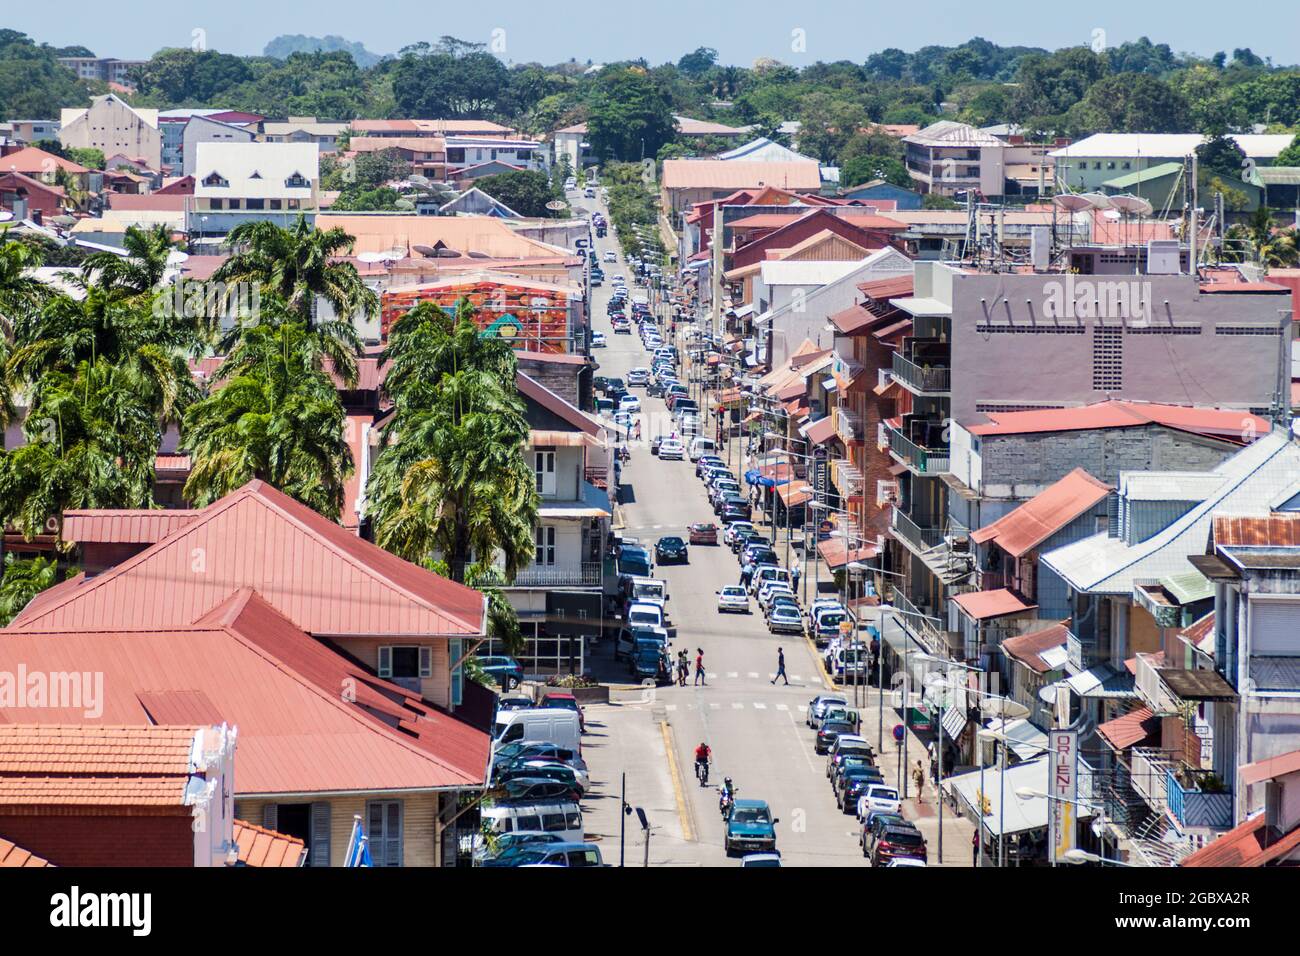 CAYENNE, FRENCH GUIANA - AUGUST 3, 2015: Rue de Remire street in the center of Cayenne, capital of French Guiana. Stock Photo